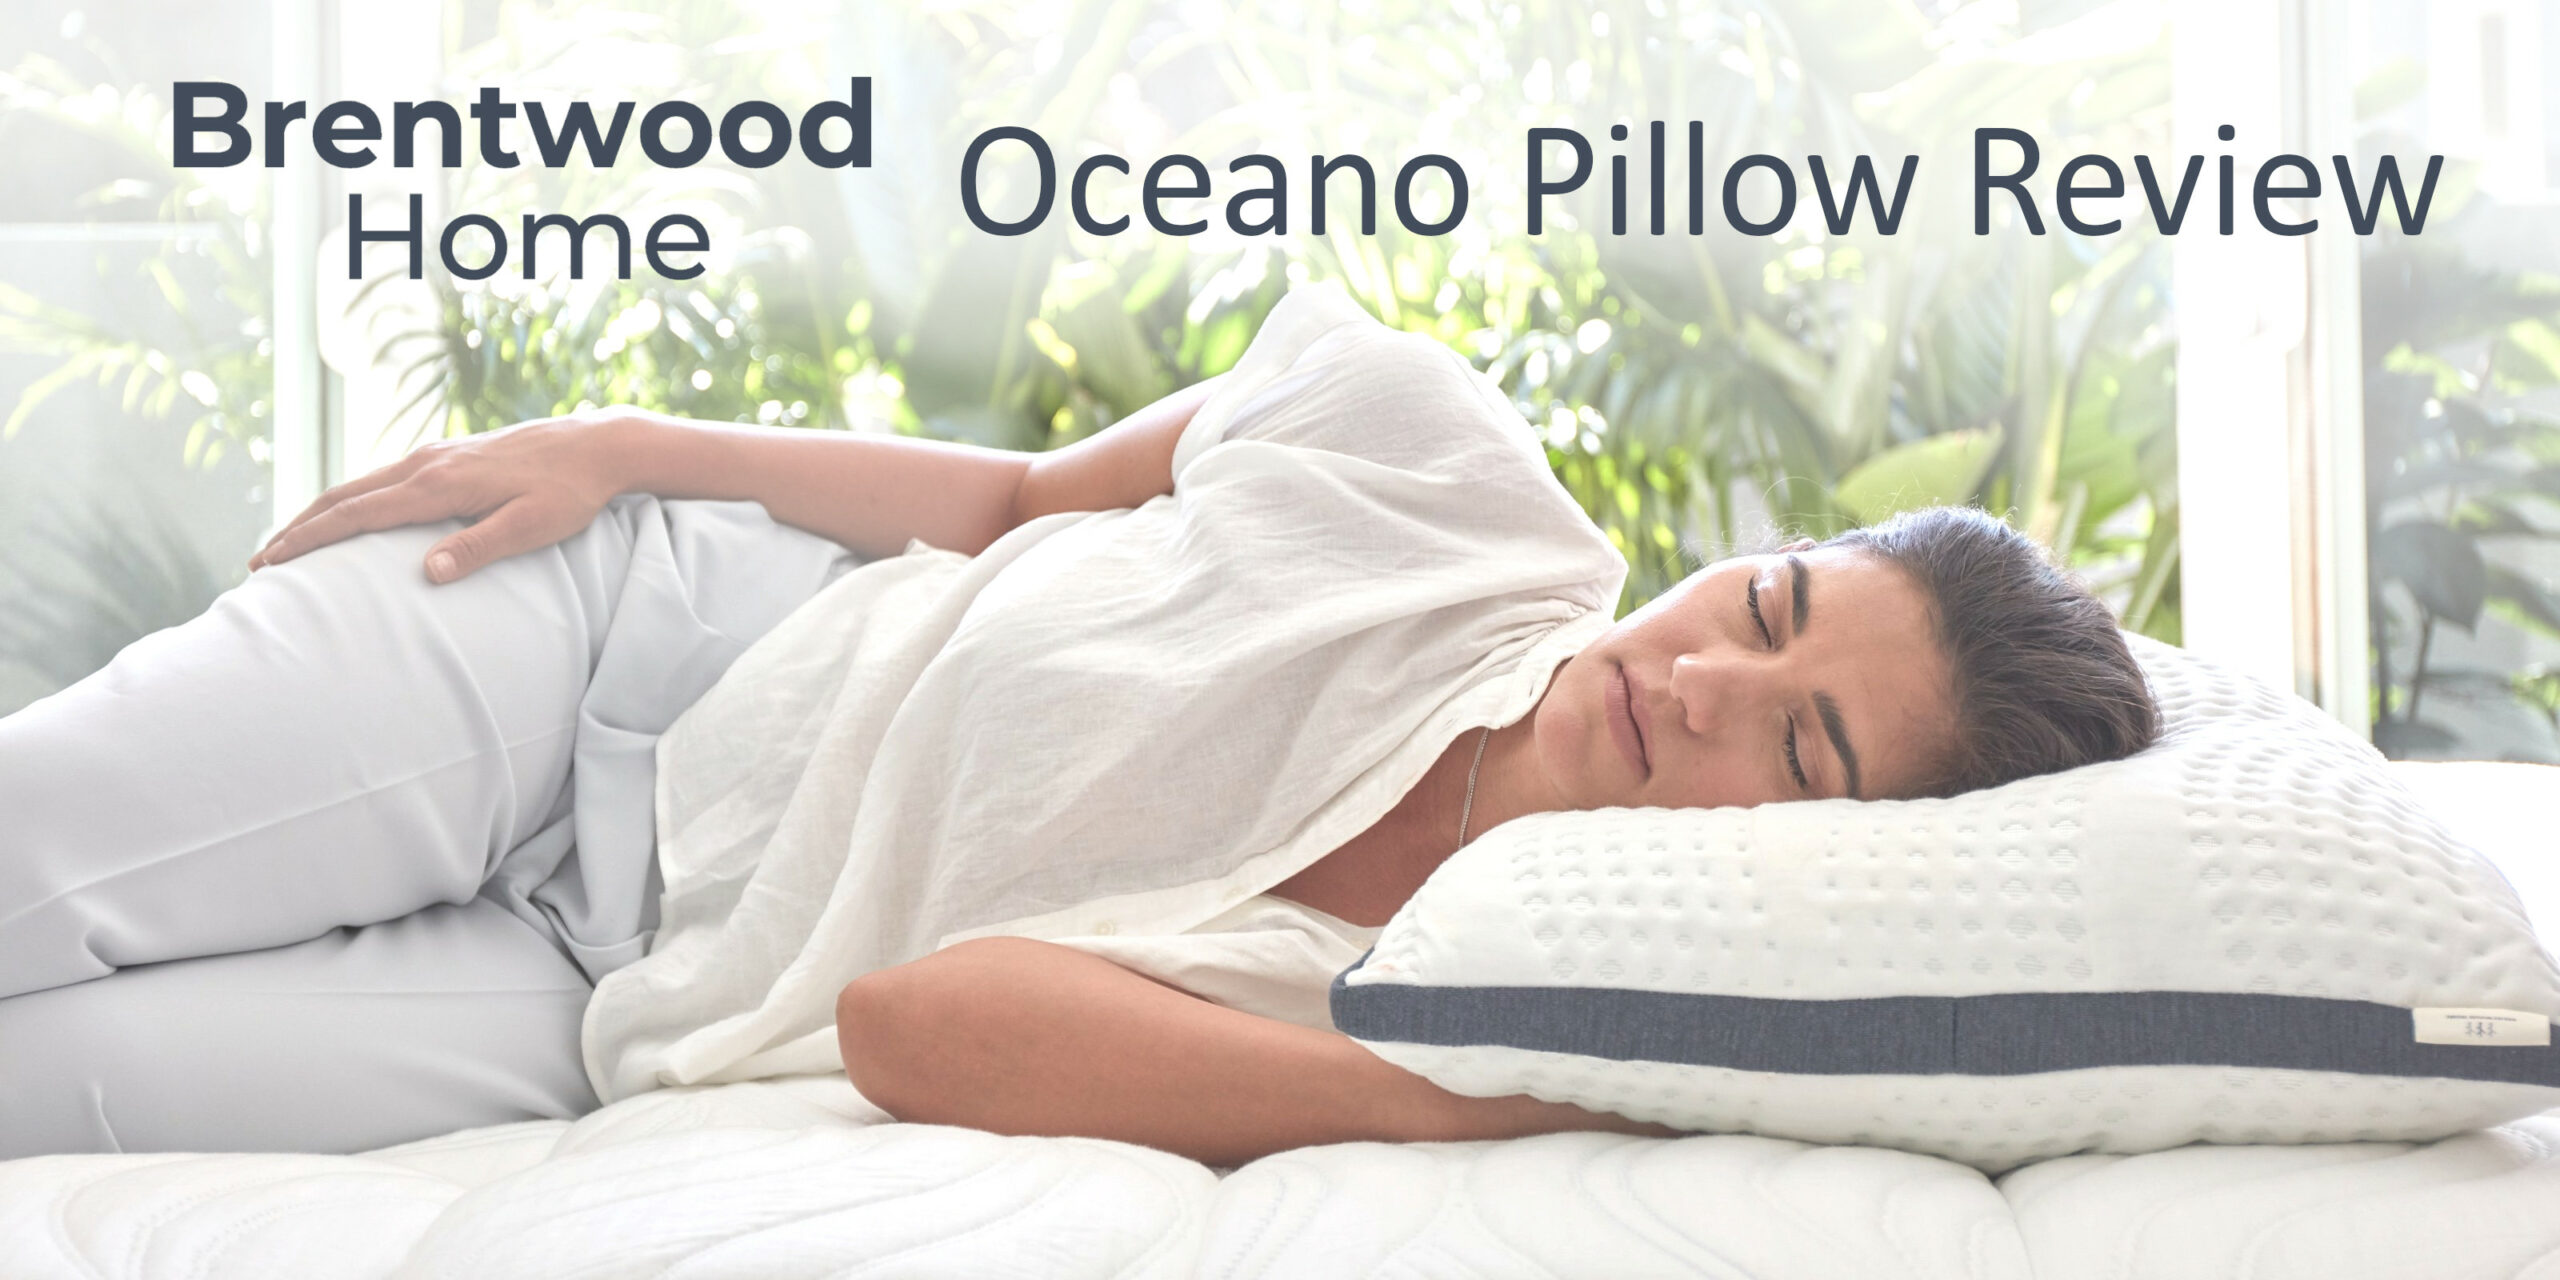 brentwood home oceano pillow review 